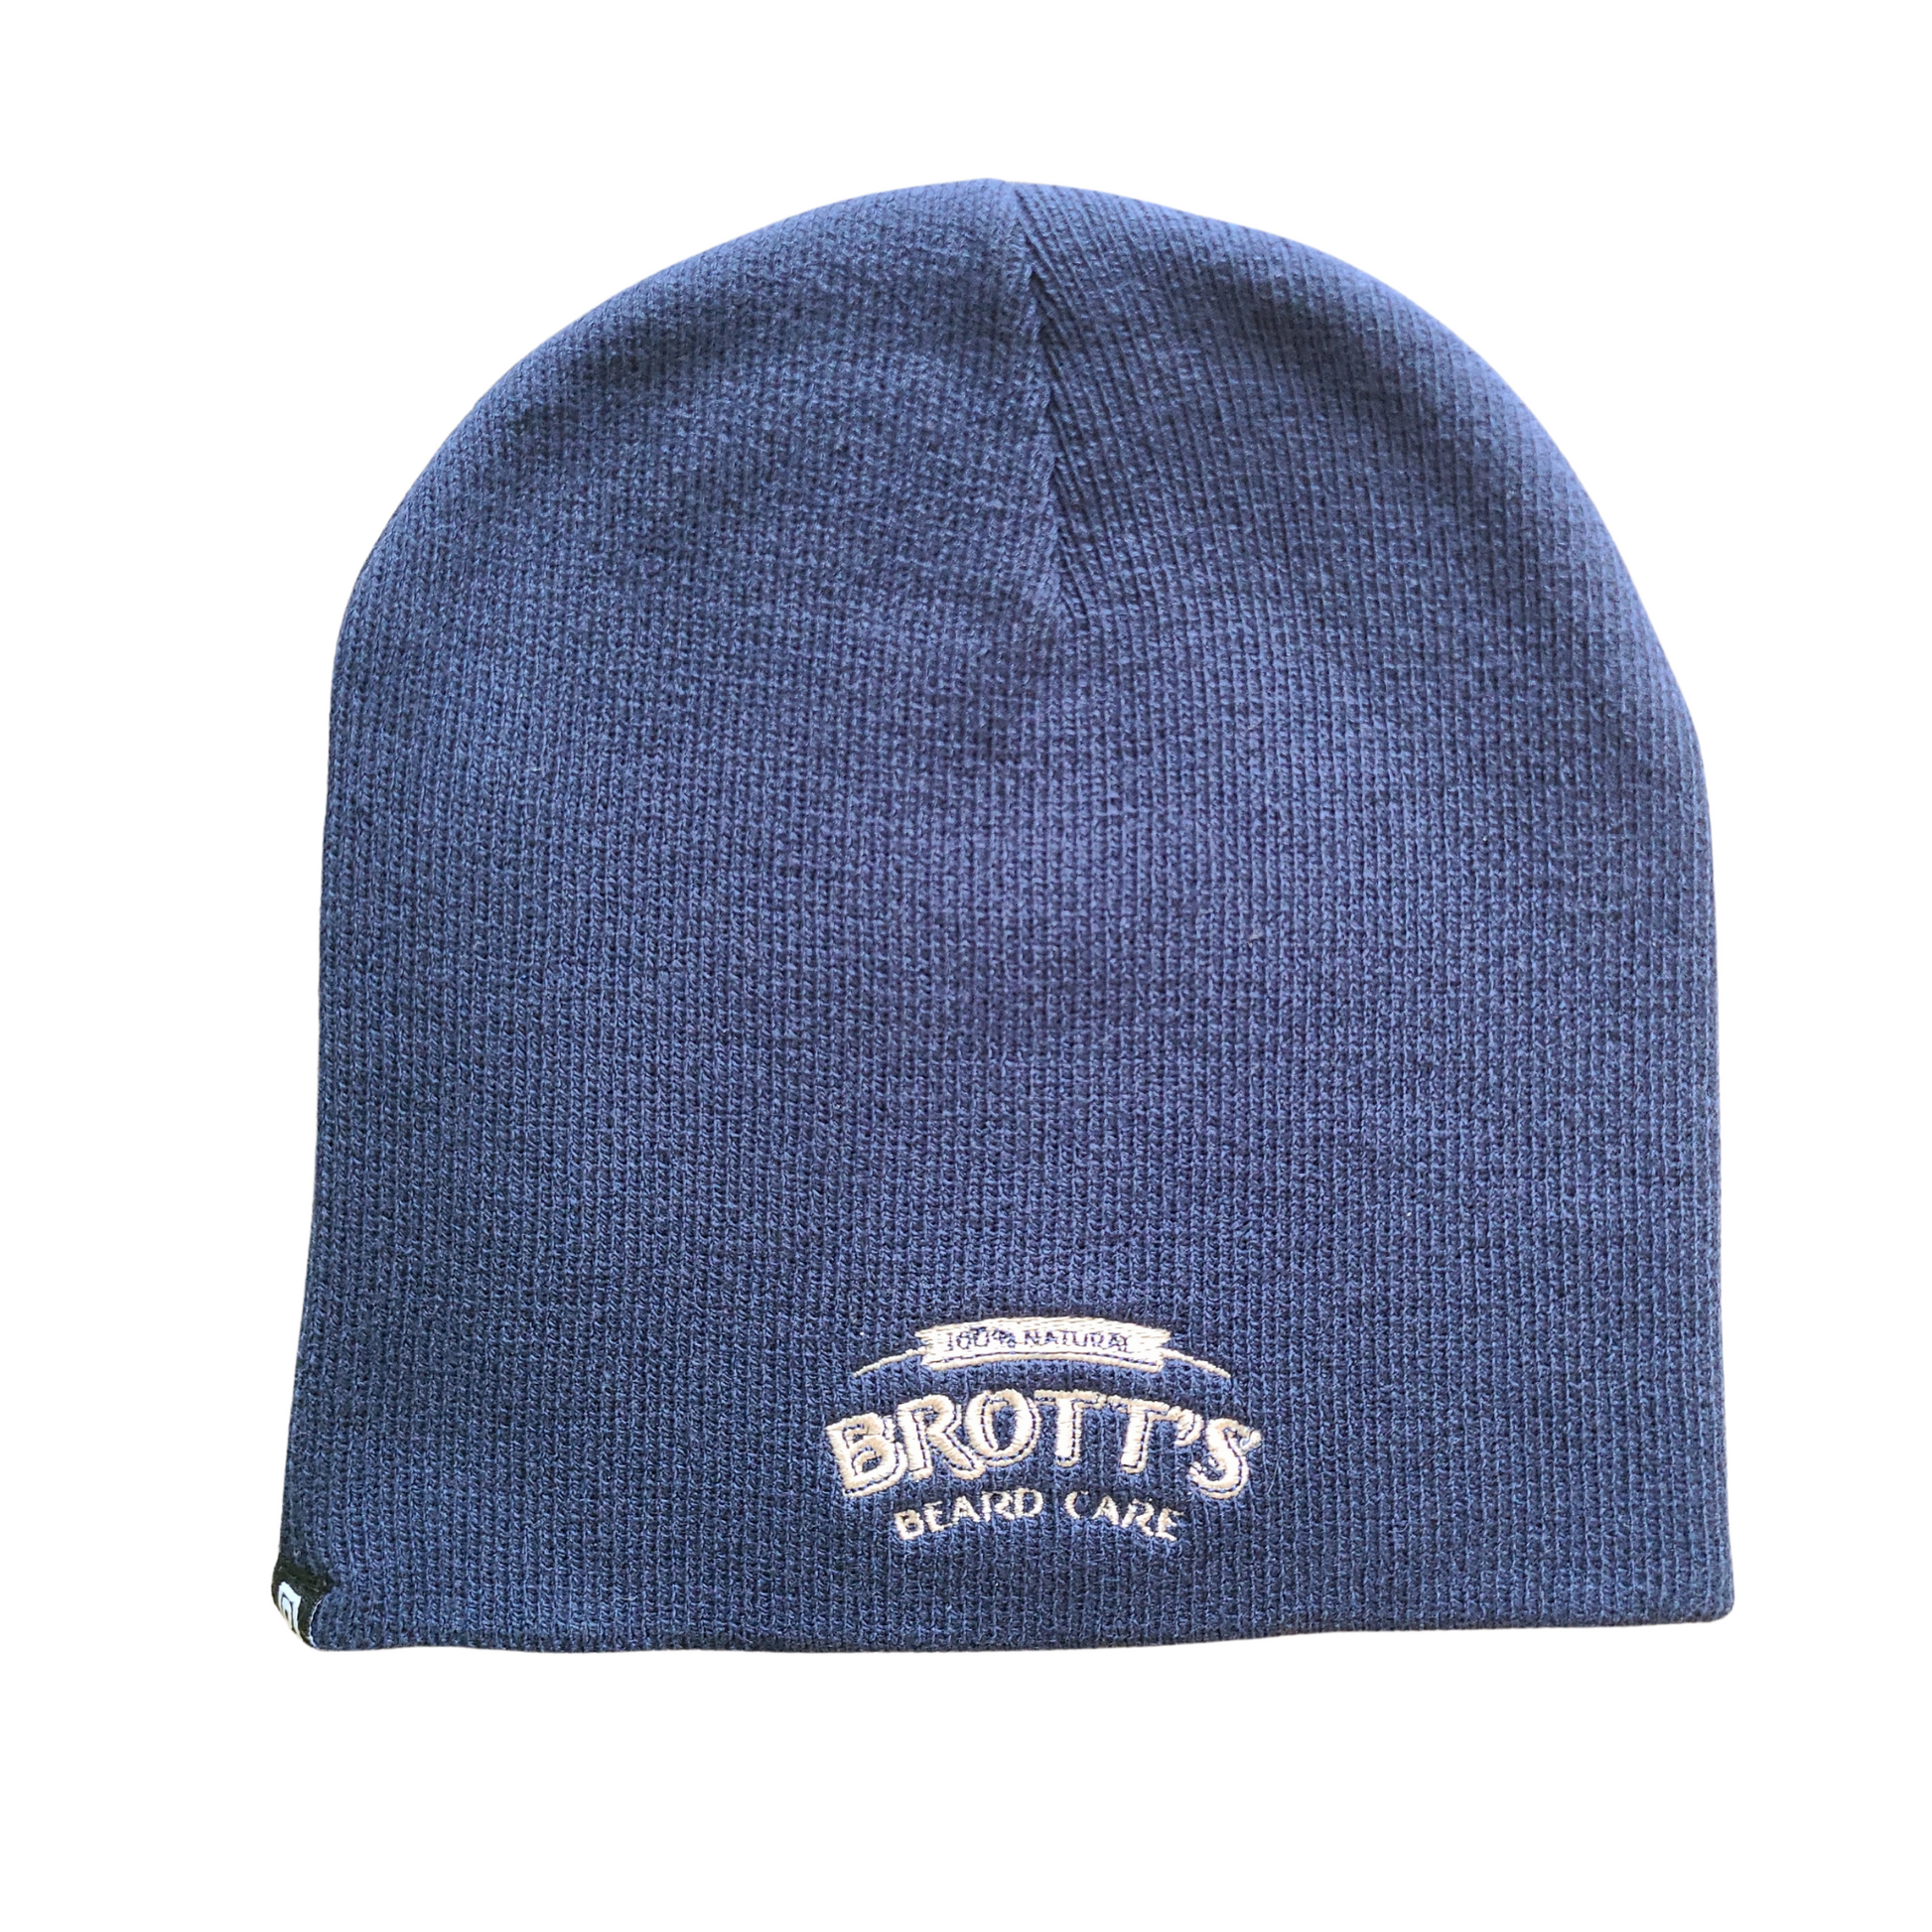 Navy blue beanie embroidered with the Brott's Beard Care logo on the back